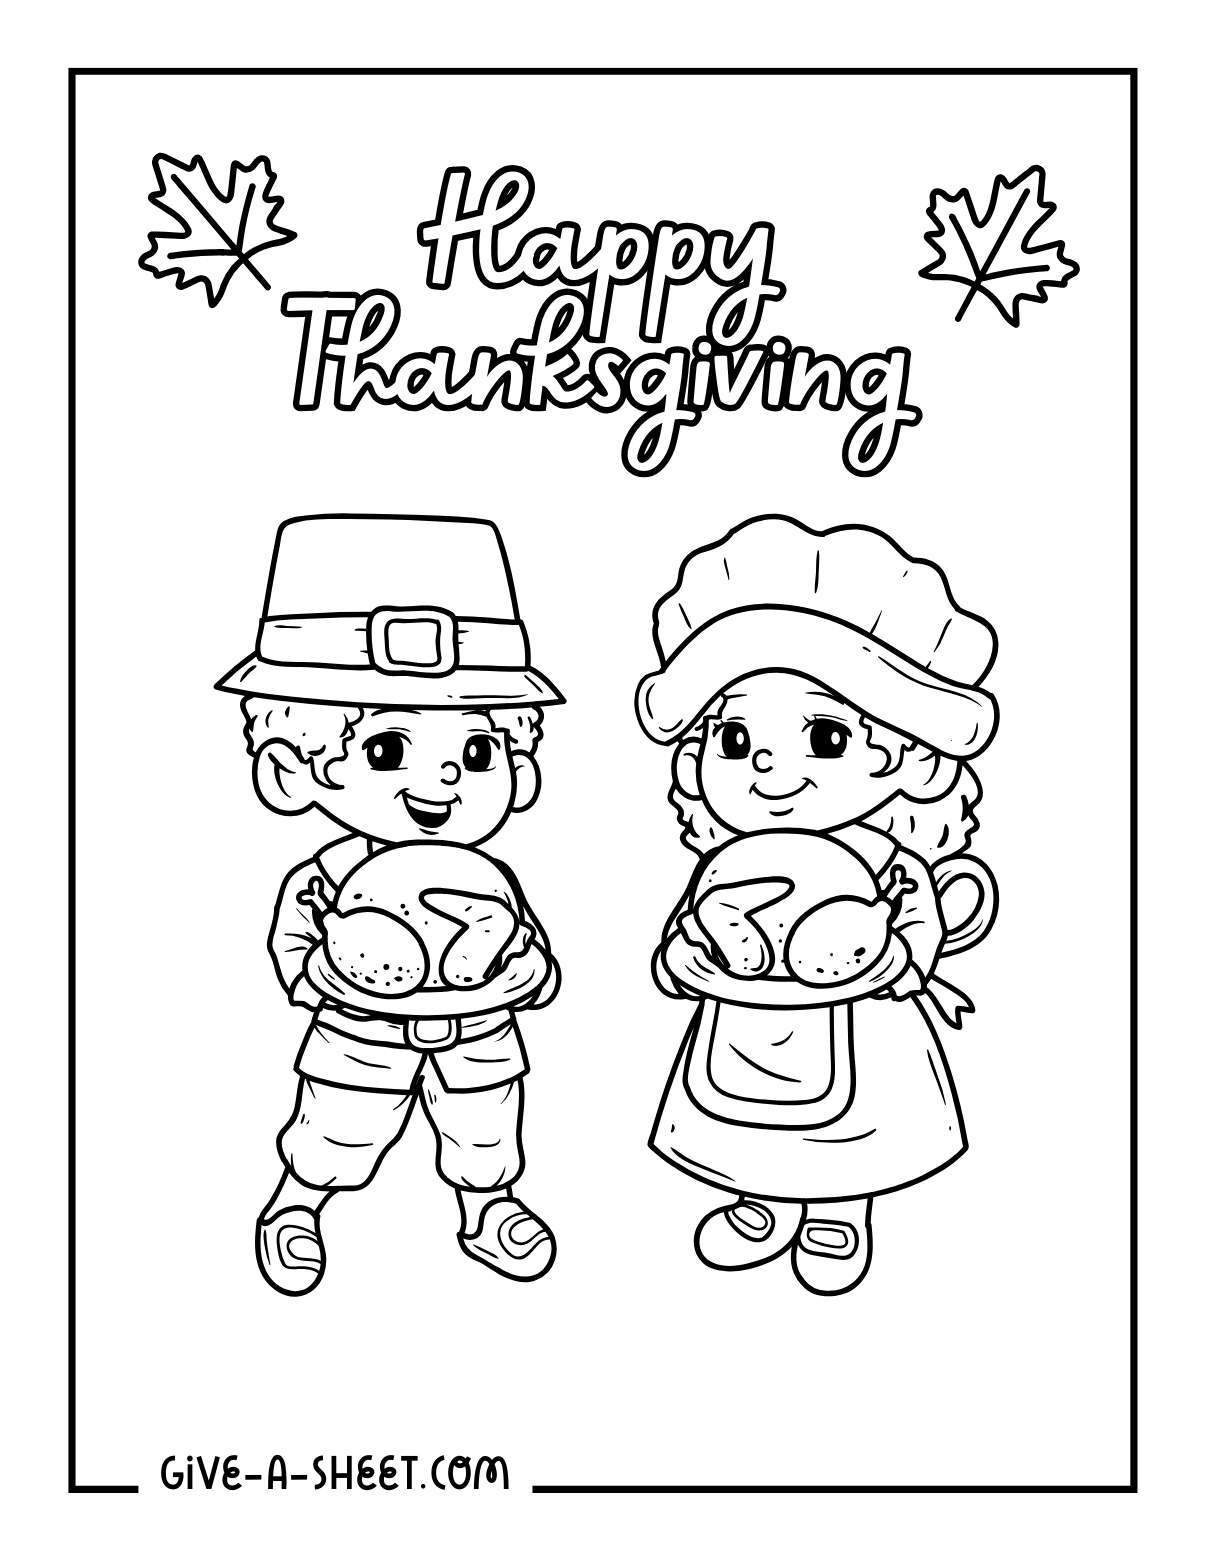 Young kids holding turkey thanksgiving meal coloring page.